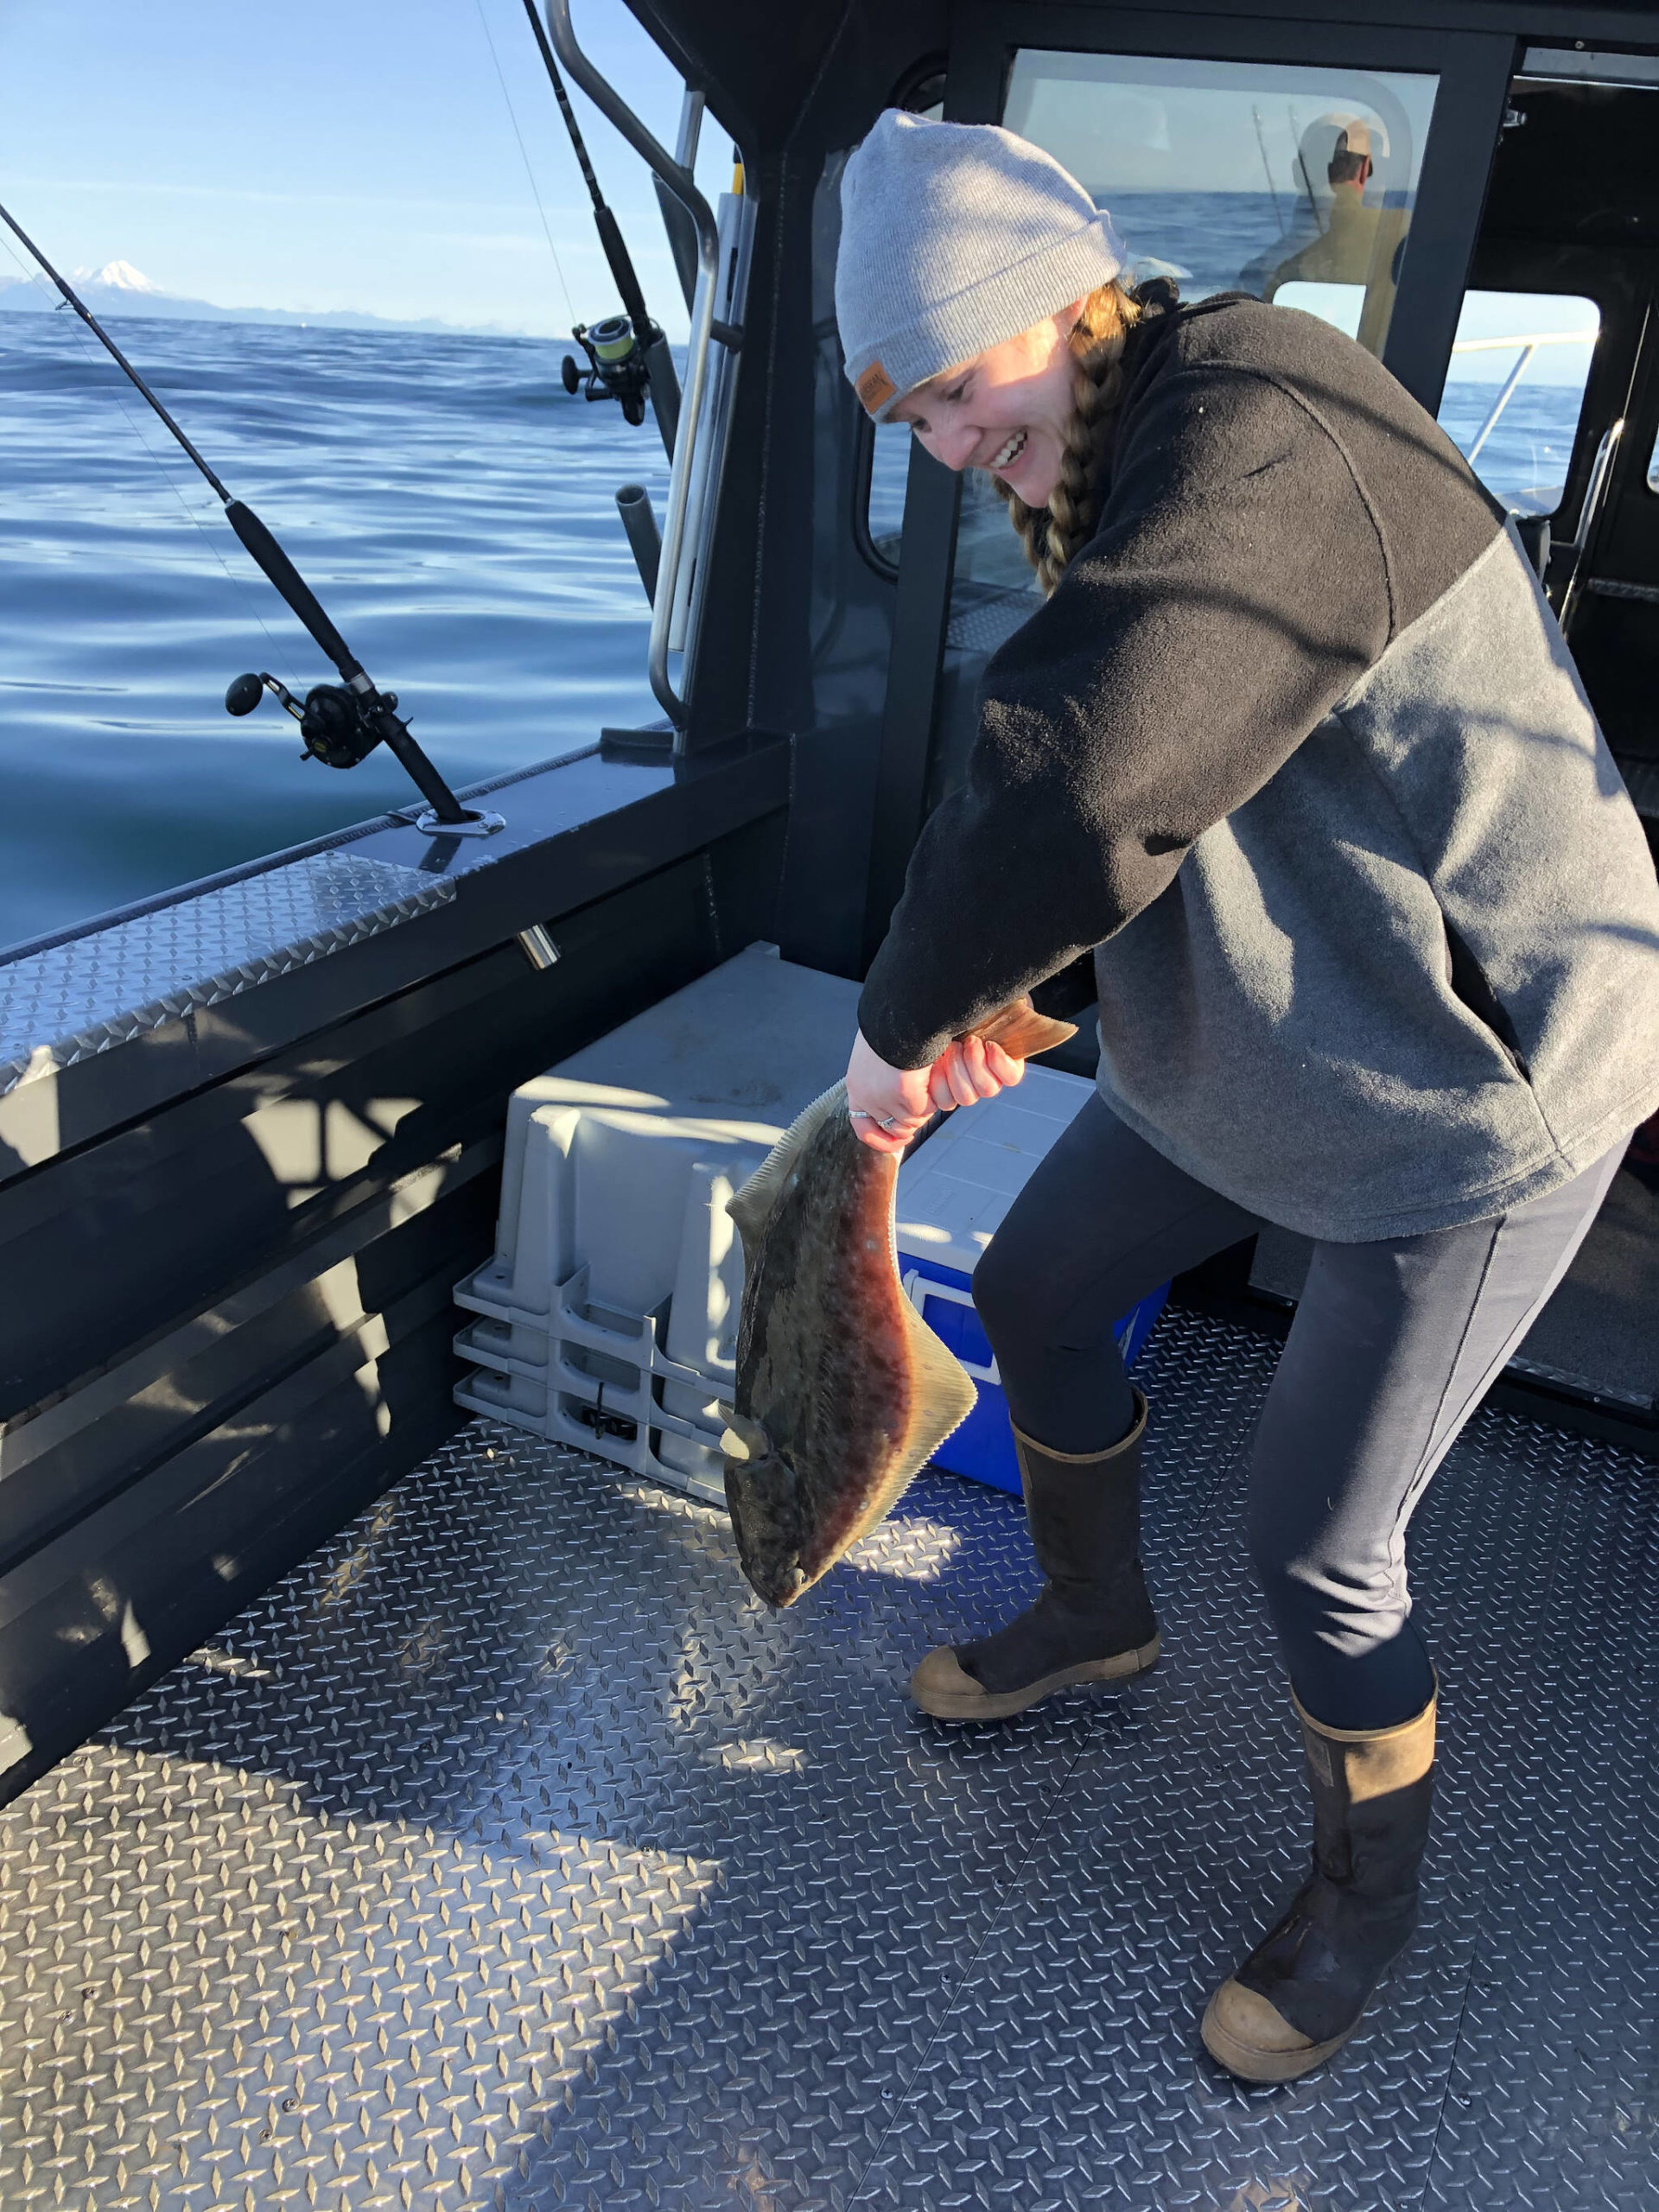 My halibut squirms after I reel it in off the coast of Homer, Alaska, on Sept. 6, 2021. (Photo provided)